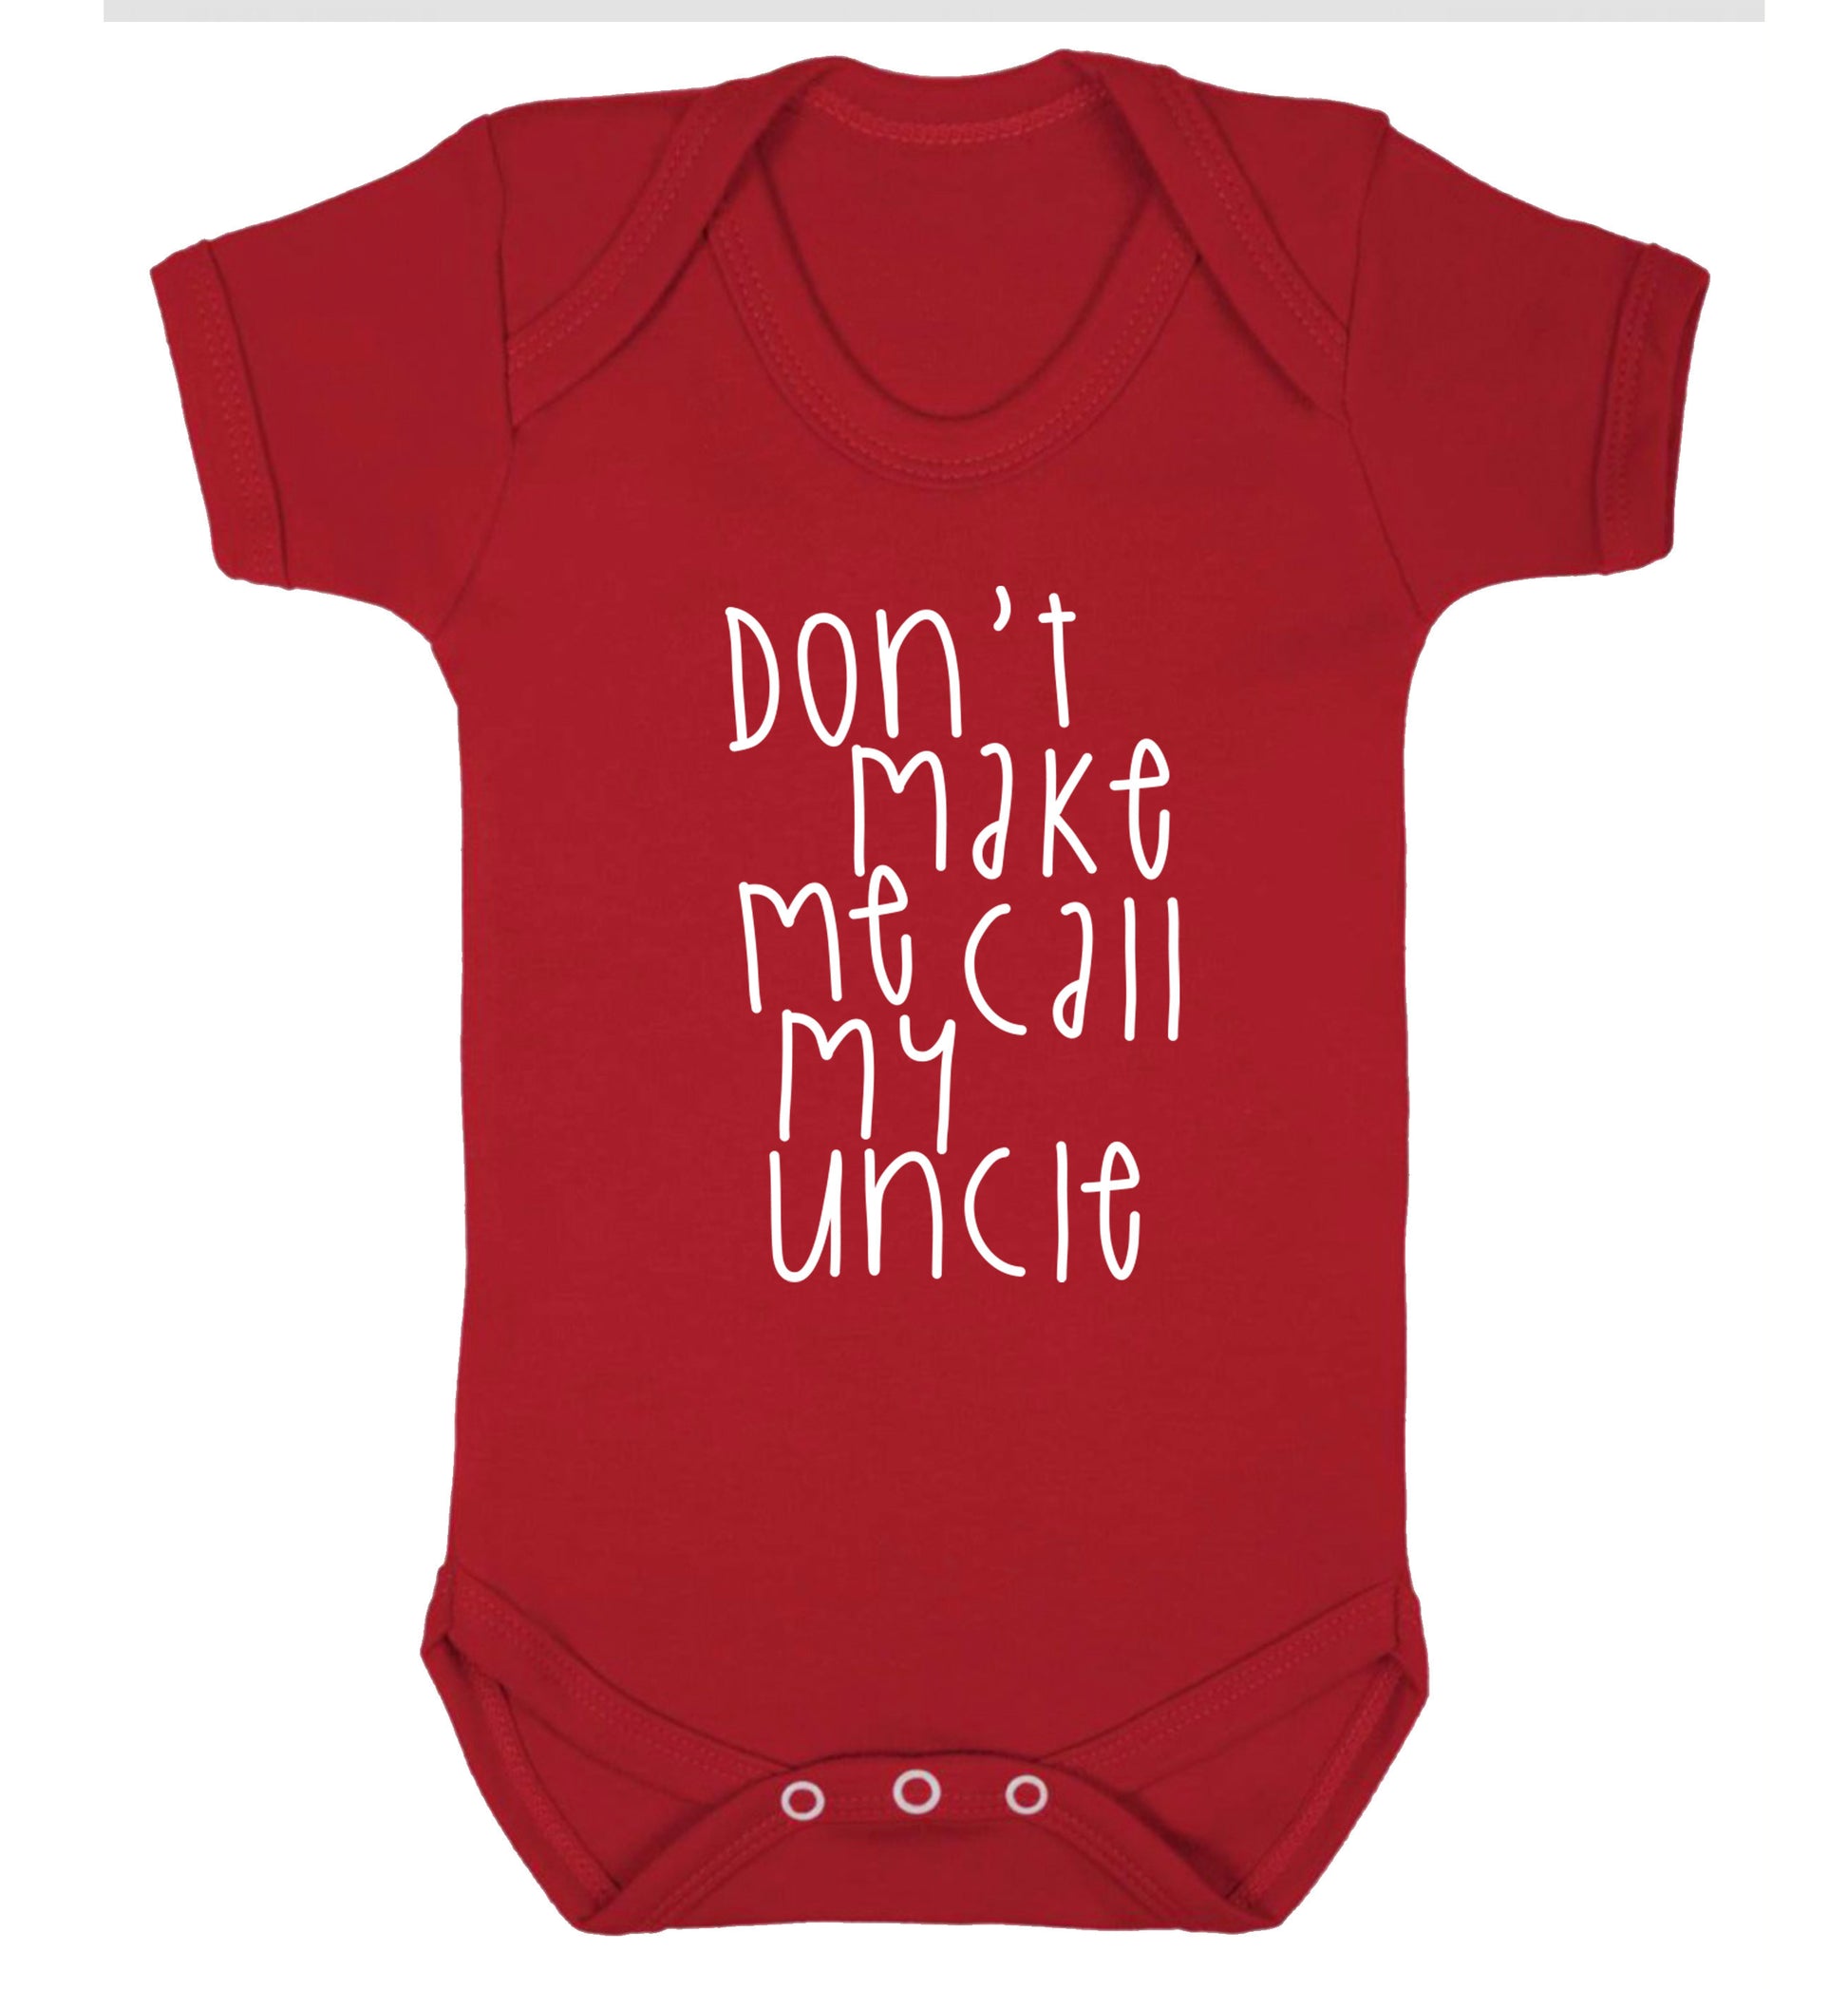 Don't make me call my uncle Baby Vest red 18-24 months